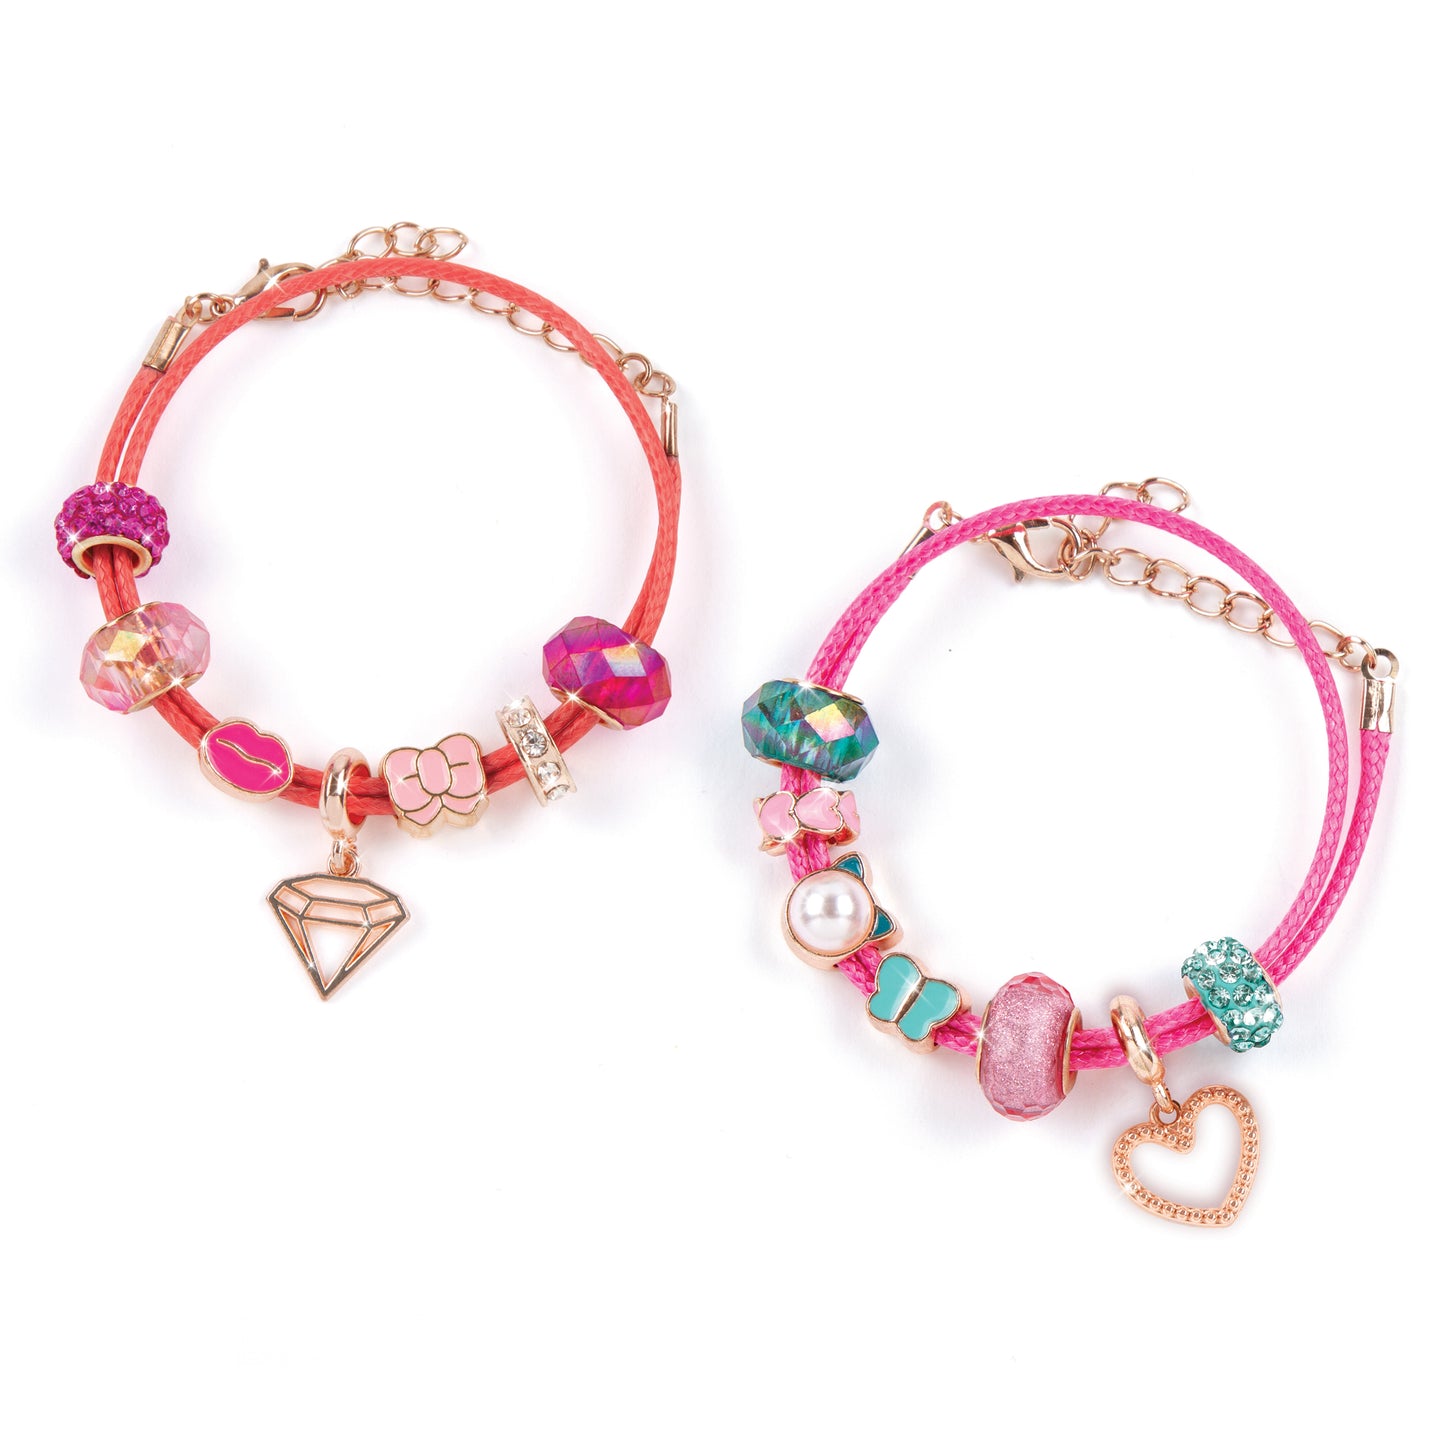 Halo Charms Bracelets: Pretty in Pink